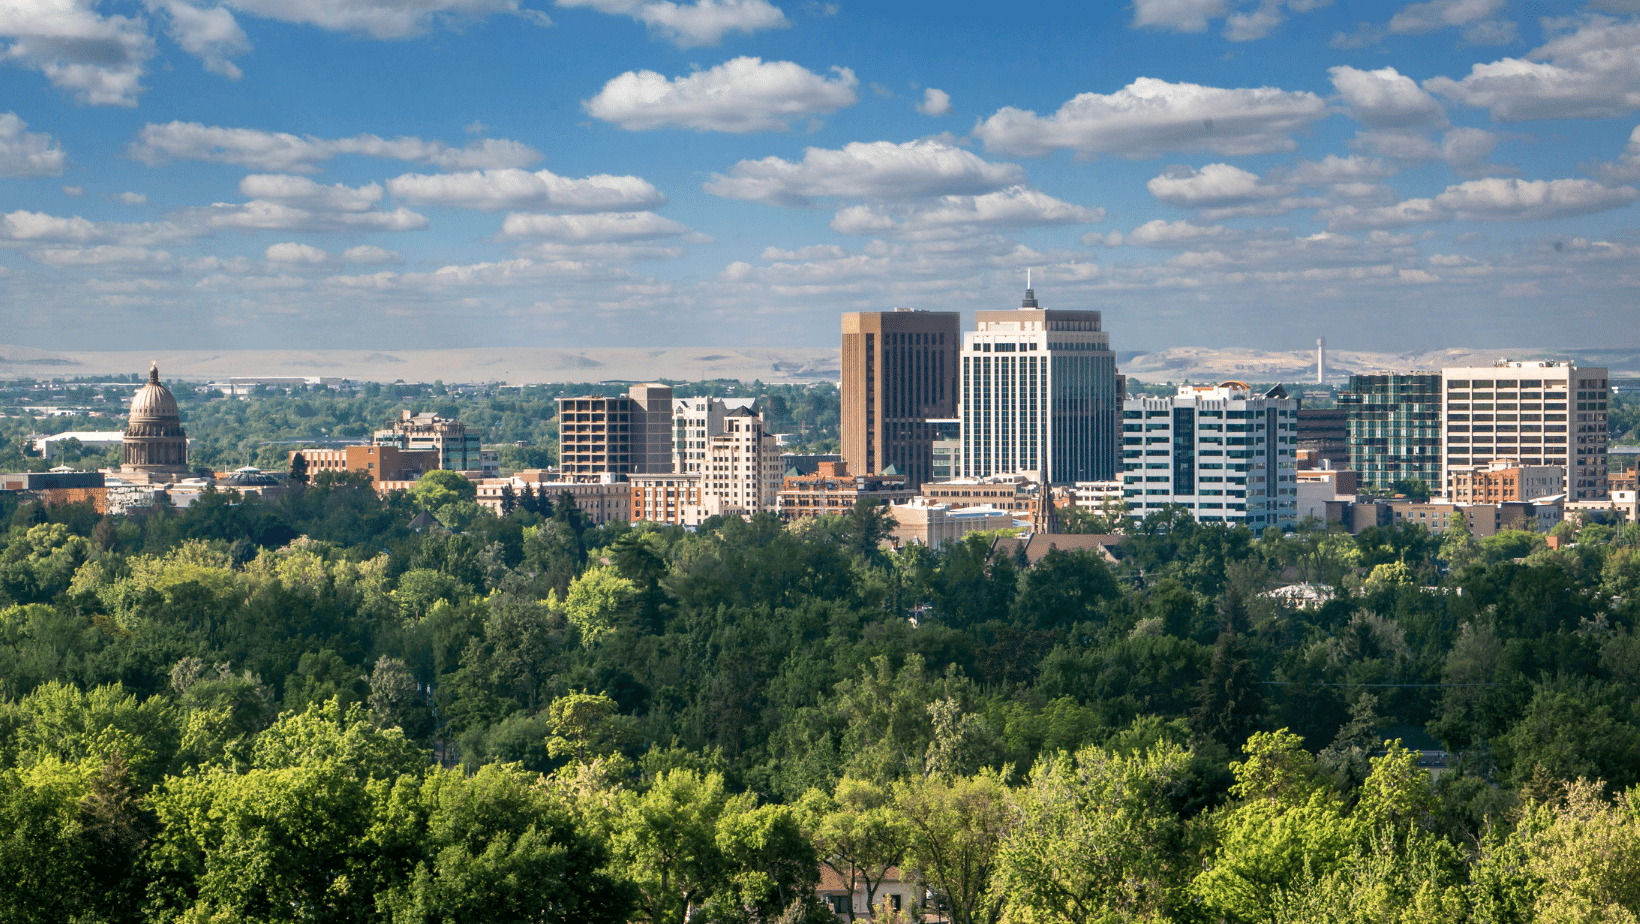 A view of the Boise city skyline from above with trees and buildings in the foreground.